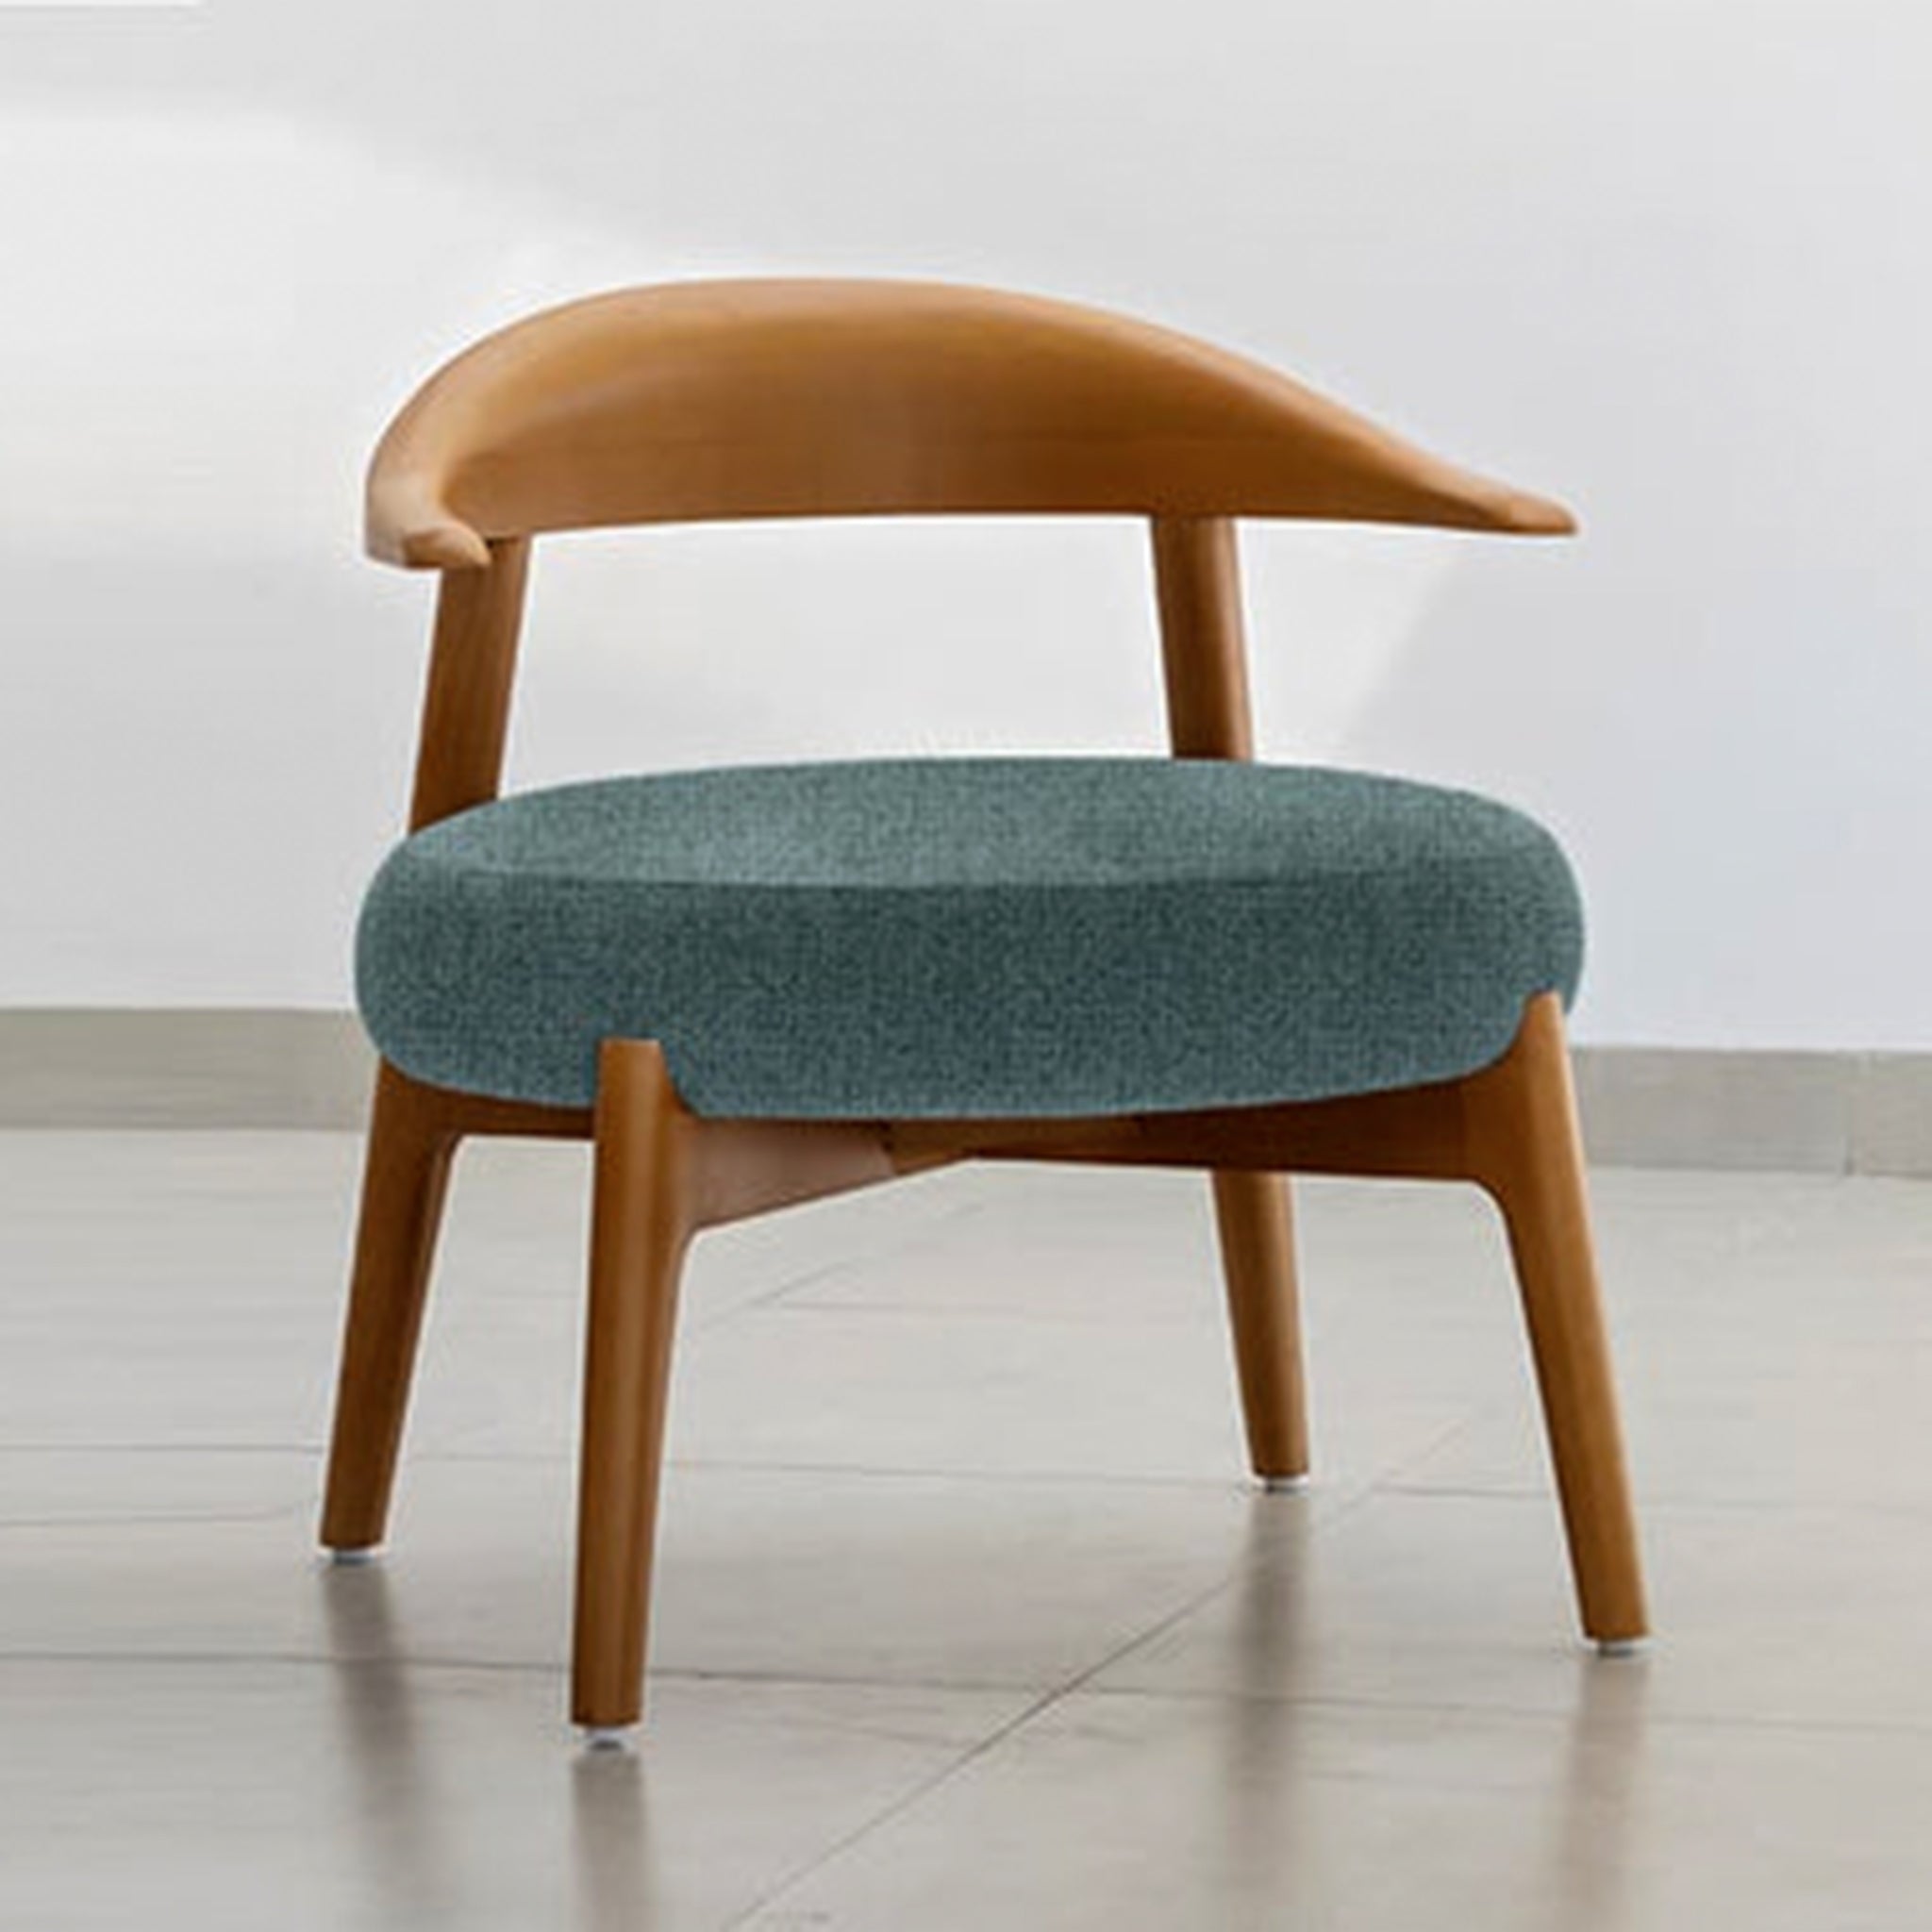 "Mid-century modern Hyde Accent Chair for stylish interiors"